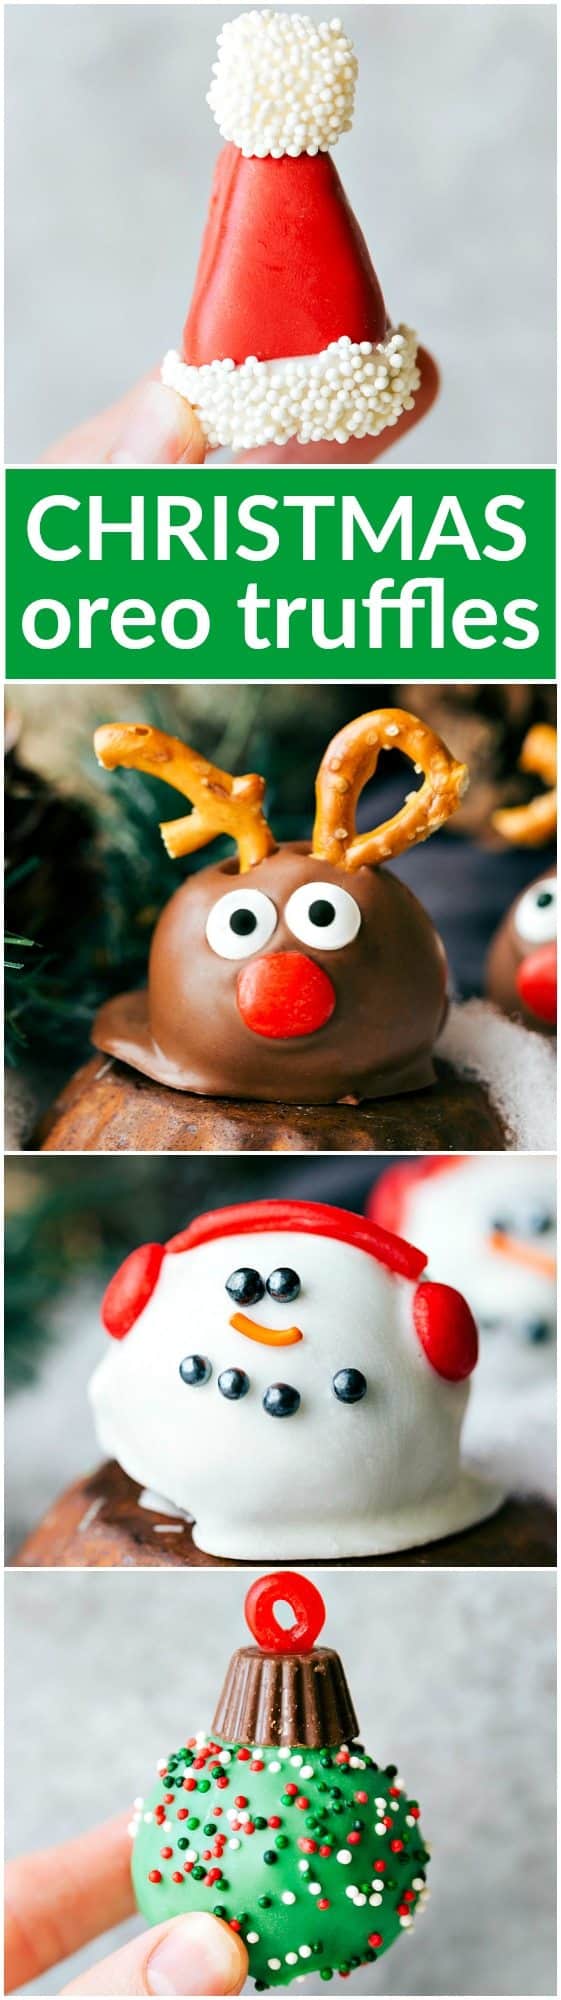 Five different ways to dress up an OREO Cookie truffle for Christmas -- Santa's hat, Reindeer, Ornament, Snowman, and the 